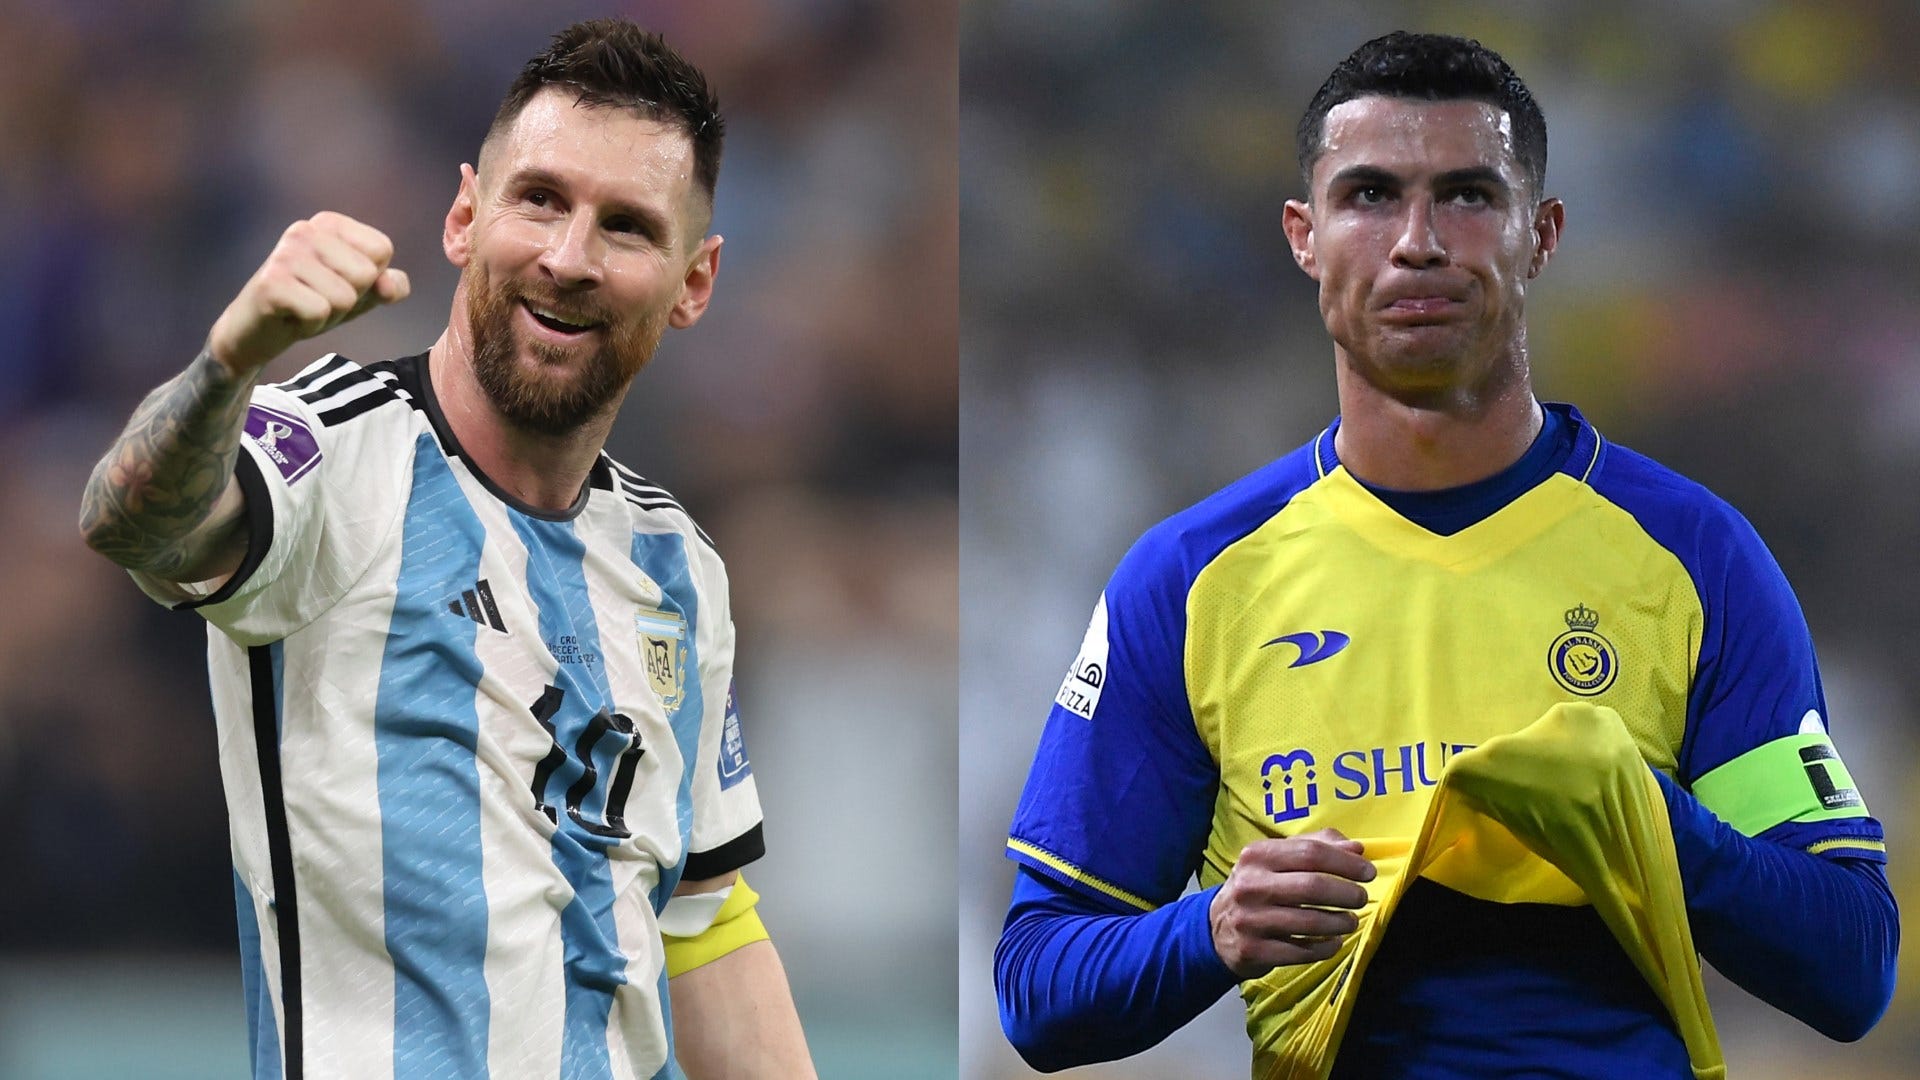 Lionel Messi awarded GOAT status over Cristiano Ronaldo as scientific research highlights greater contributions to team success